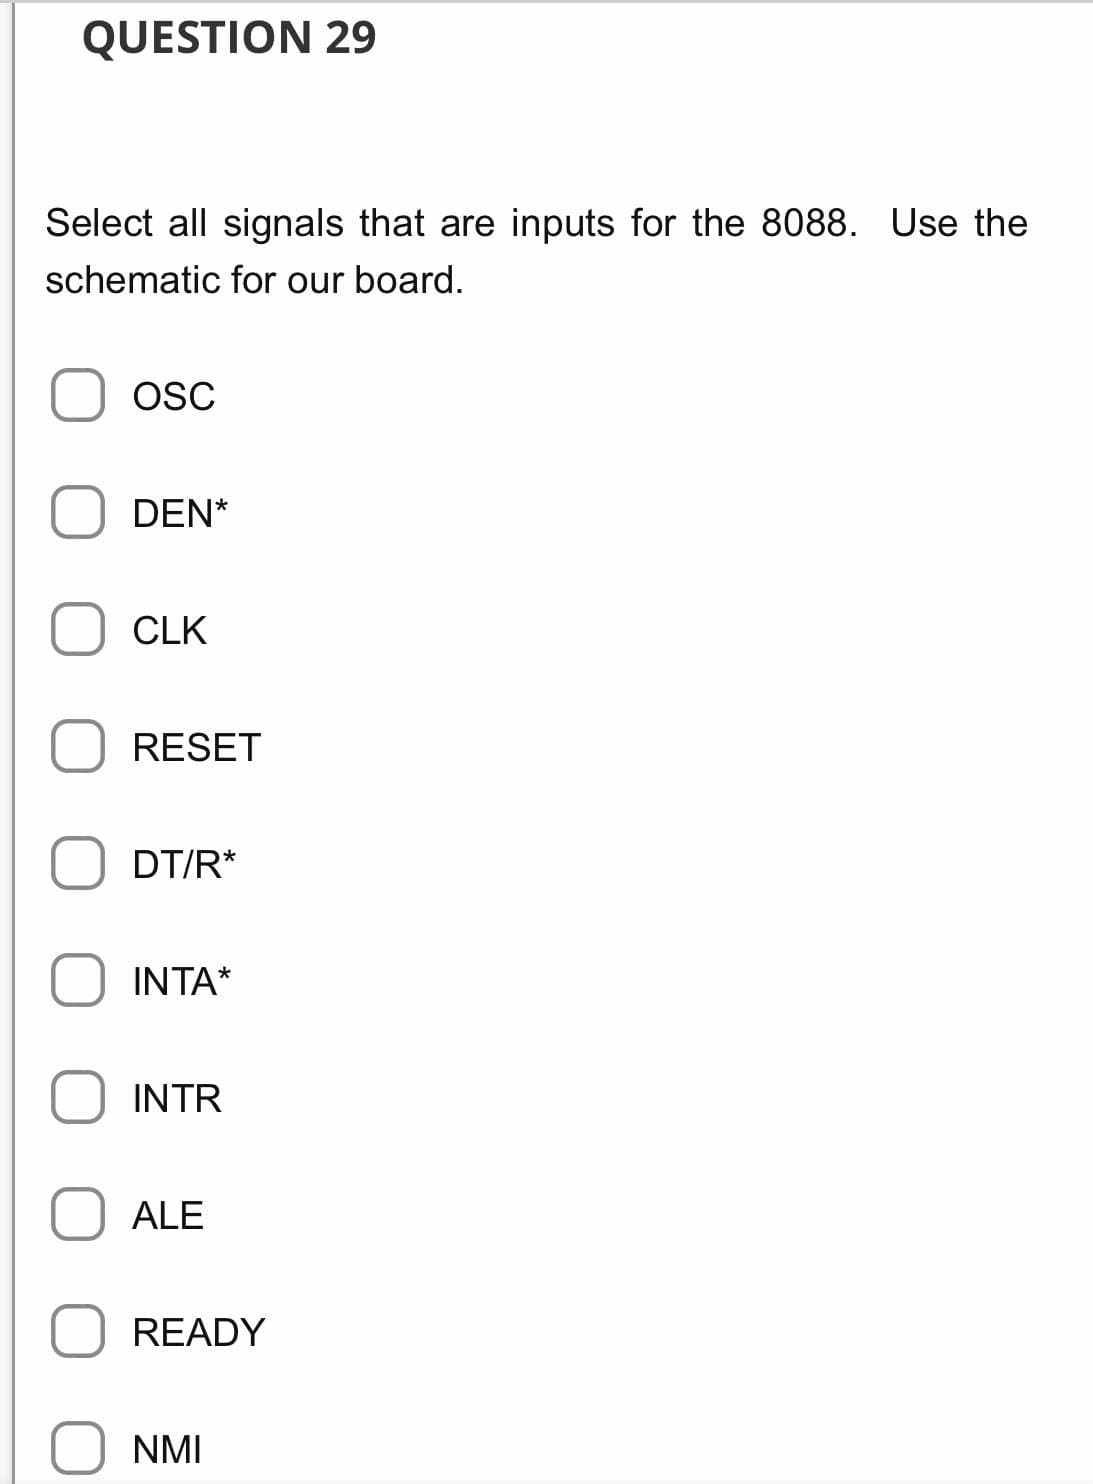 QUESTION 29
Select all signals that are inputs for the 8088. Use the
schematic for our board.
OSC
DEN*
CLK
RESET
DT/R*
INTA*
INTR
ALE
READY
NMI
